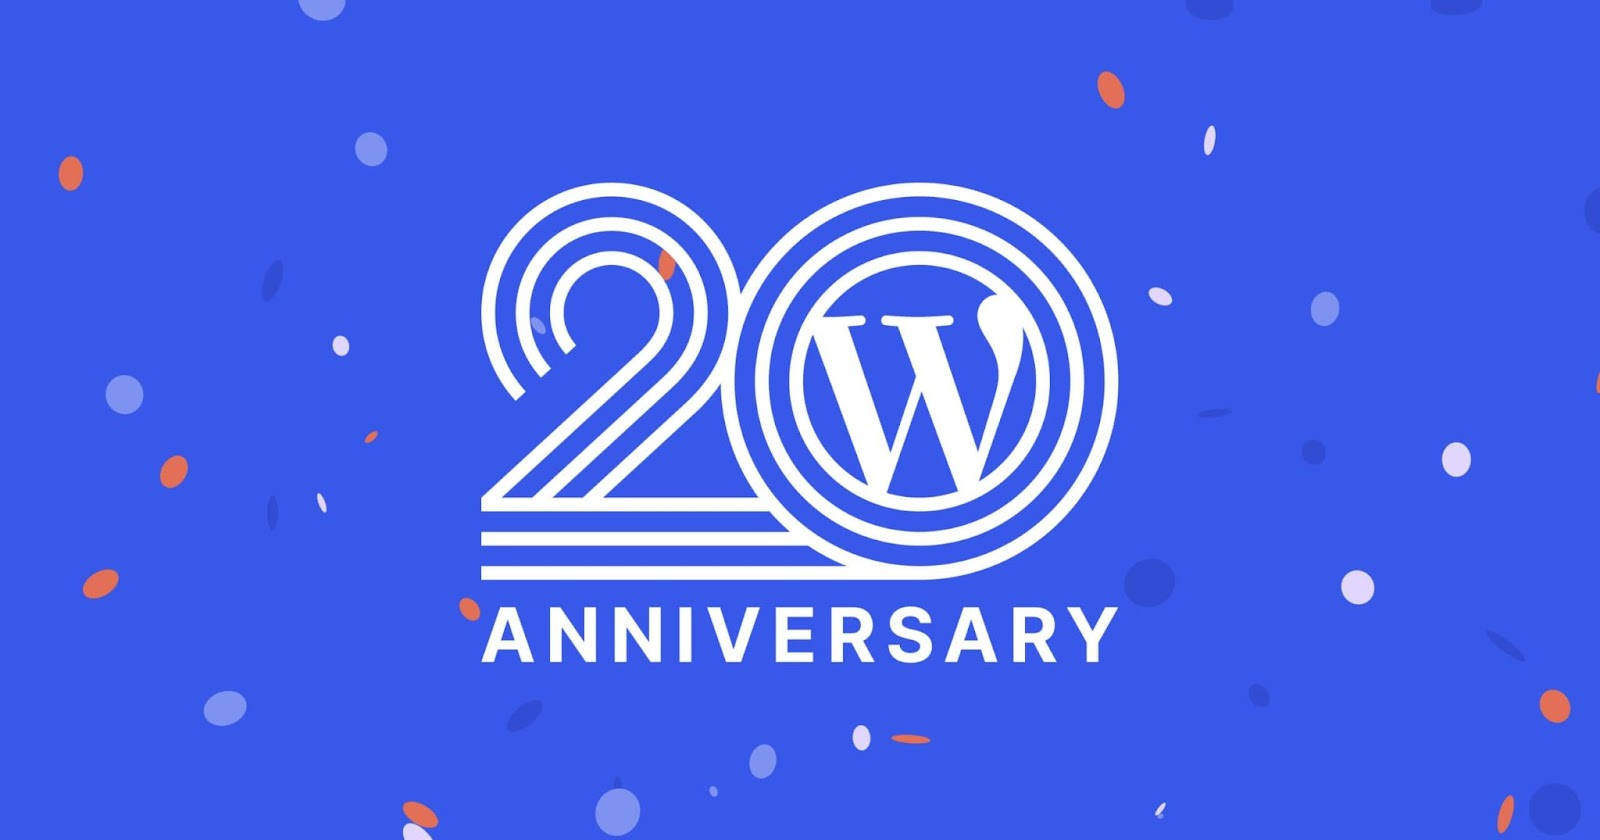 WordPress Is Turning 20: Time For Celebrations!